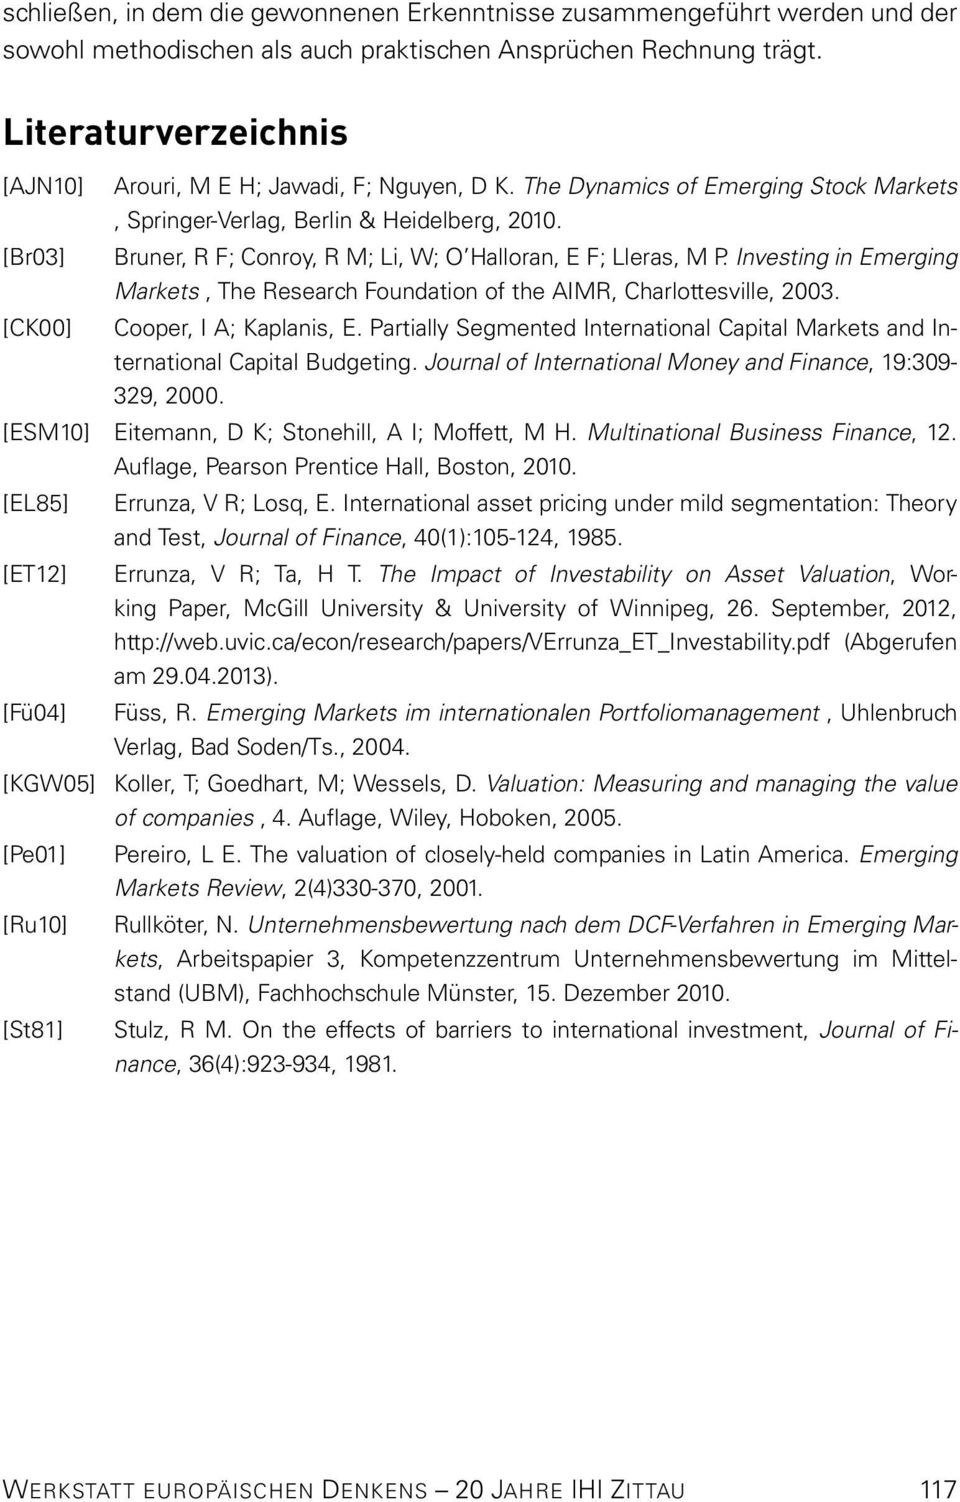 [Br03] Bruner, R F; Conroy, R M; Li, W; O Halloran, E F; Lleras, M P. Investing in Emerging Markets, The Research Foundation of the AIMR, Charlottesville, 2003. [CK00] Cooper, I A; Kaplanis, E.